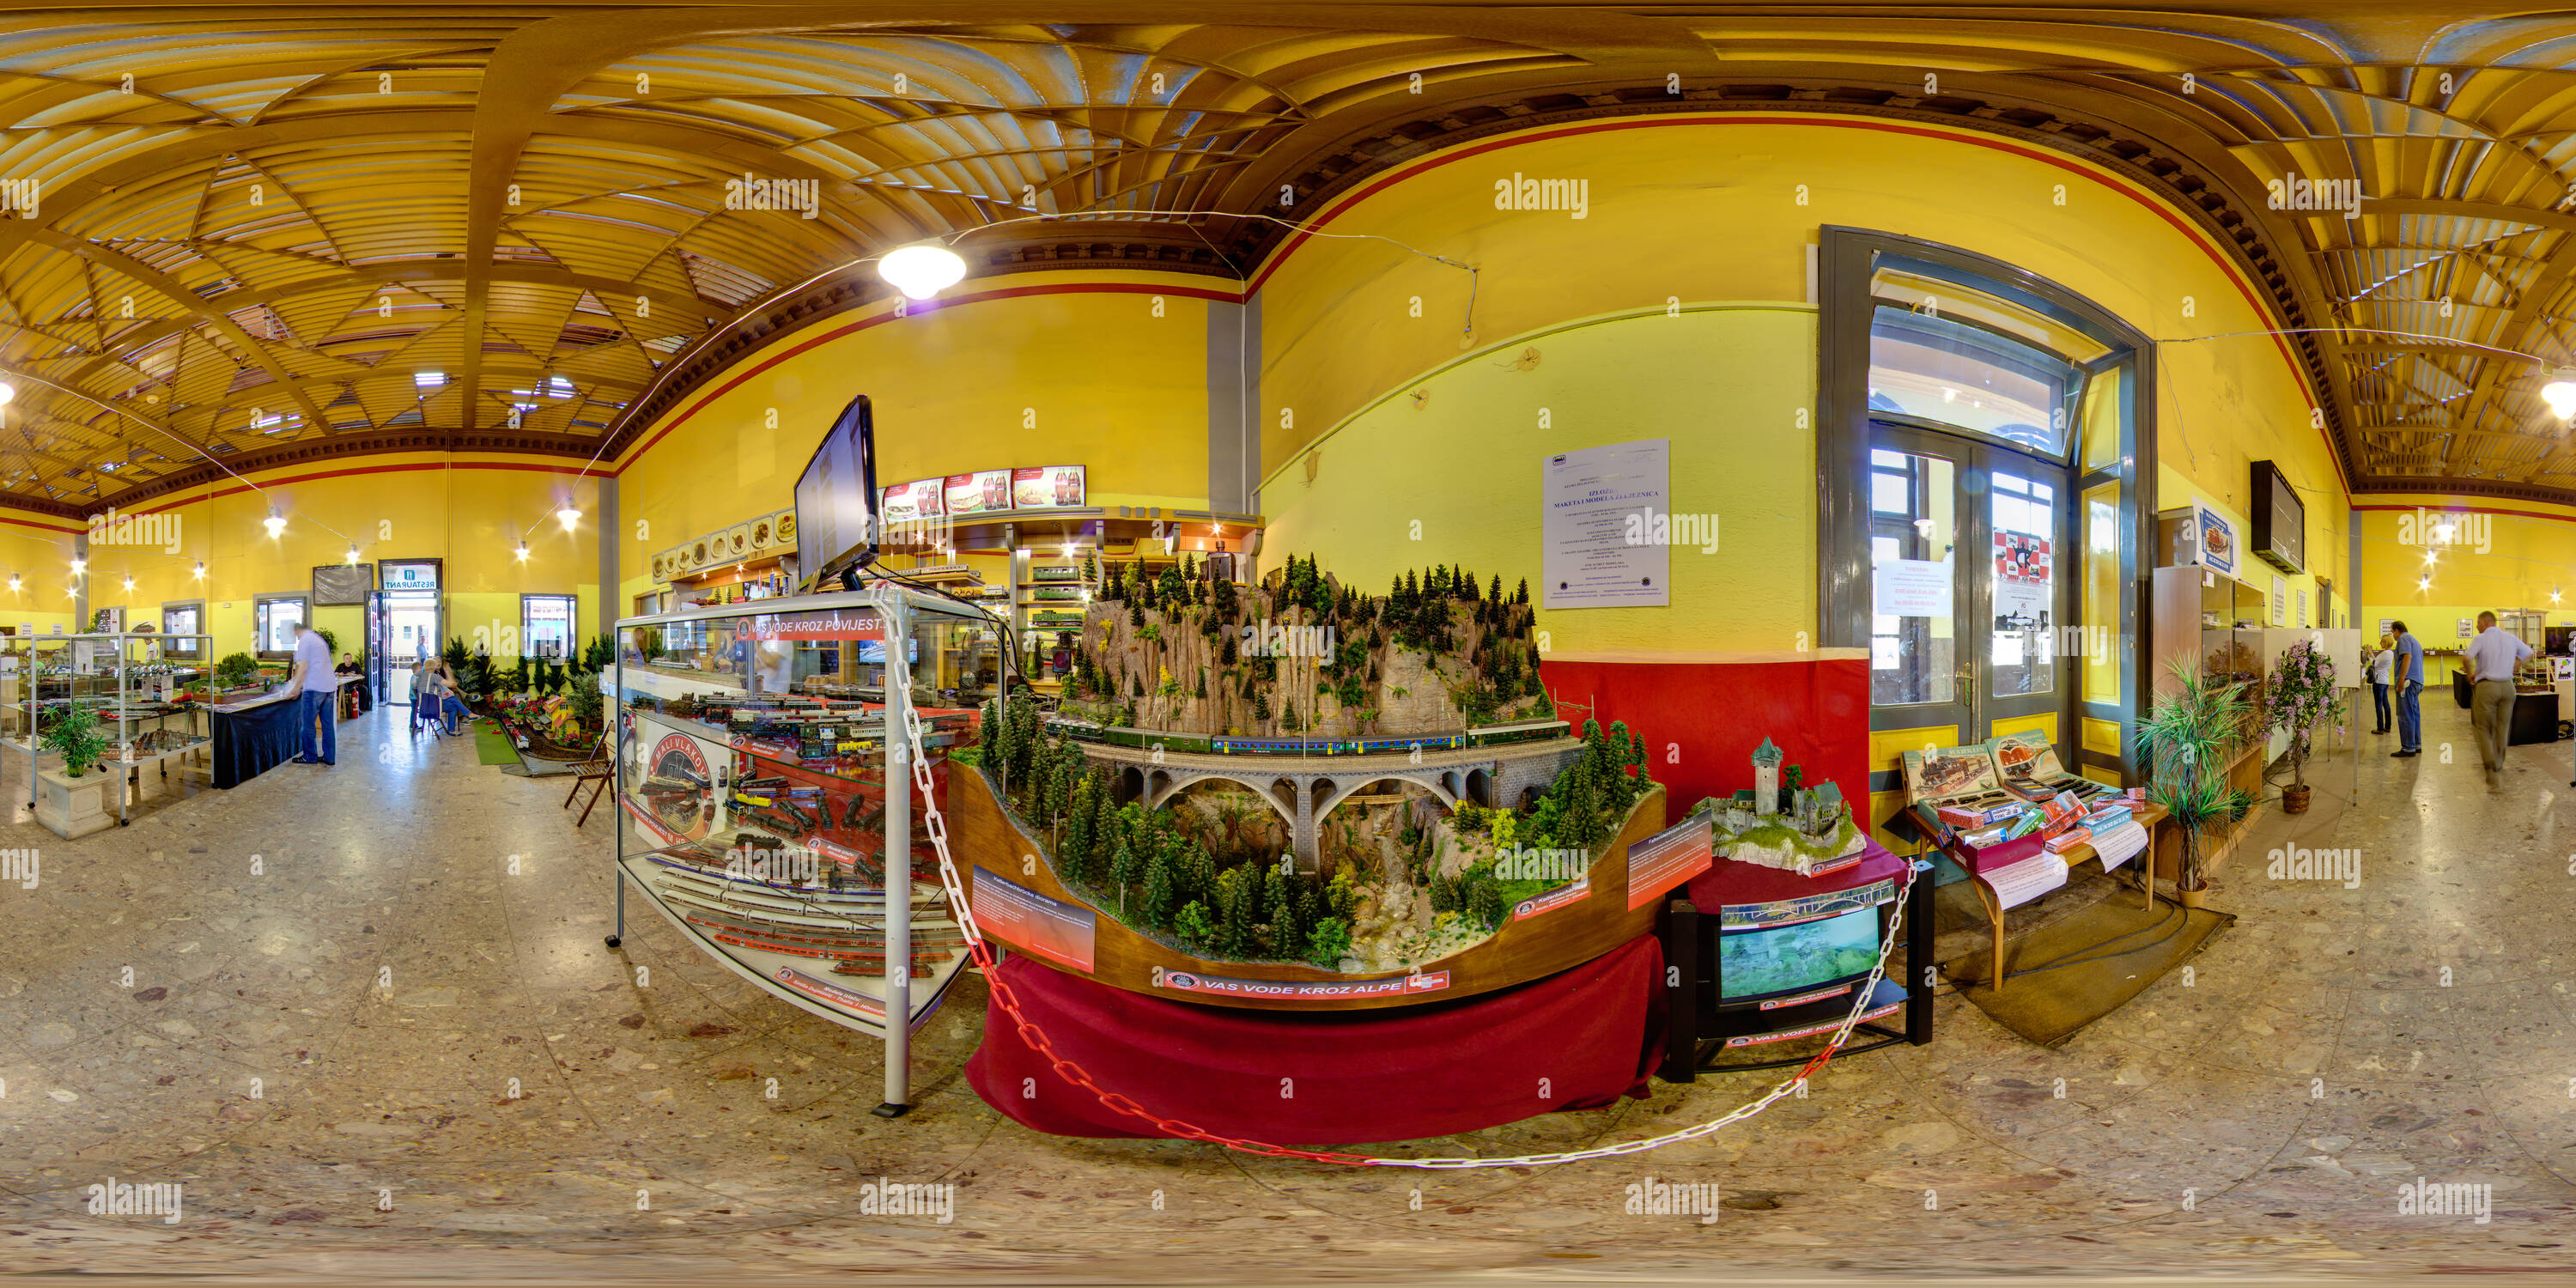 360 degree panoramic view of Model railway exhibition at the Main Train Station 2